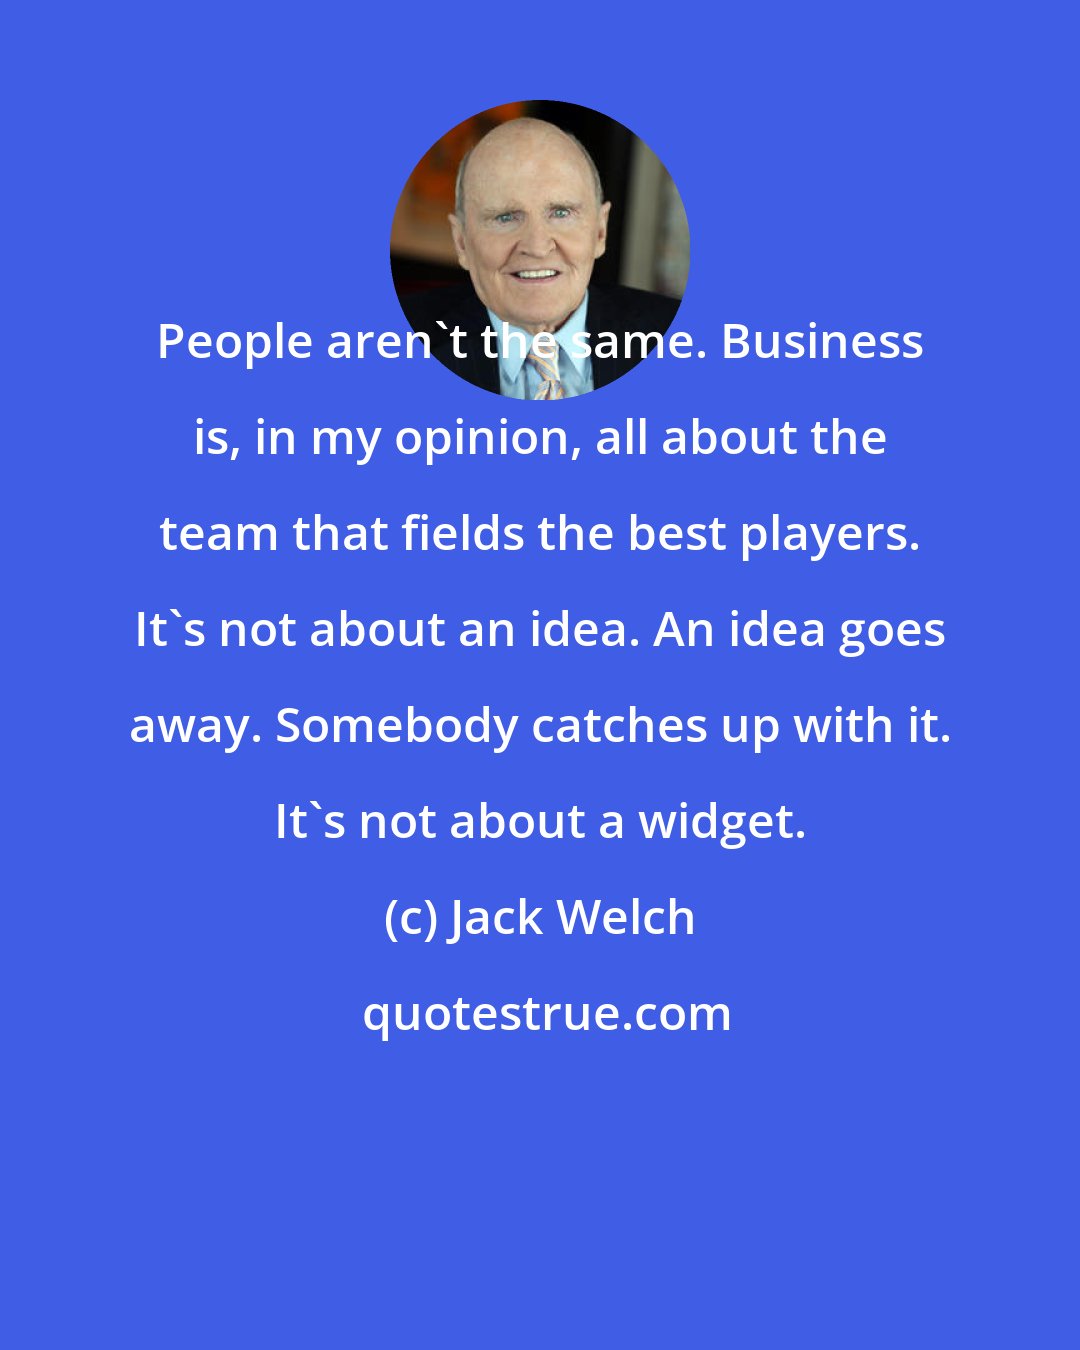 Jack Welch: People aren't the same. Business is, in my opinion, all about the team that fields the best players. It's not about an idea. An idea goes away. Somebody catches up with it. It's not about a widget.